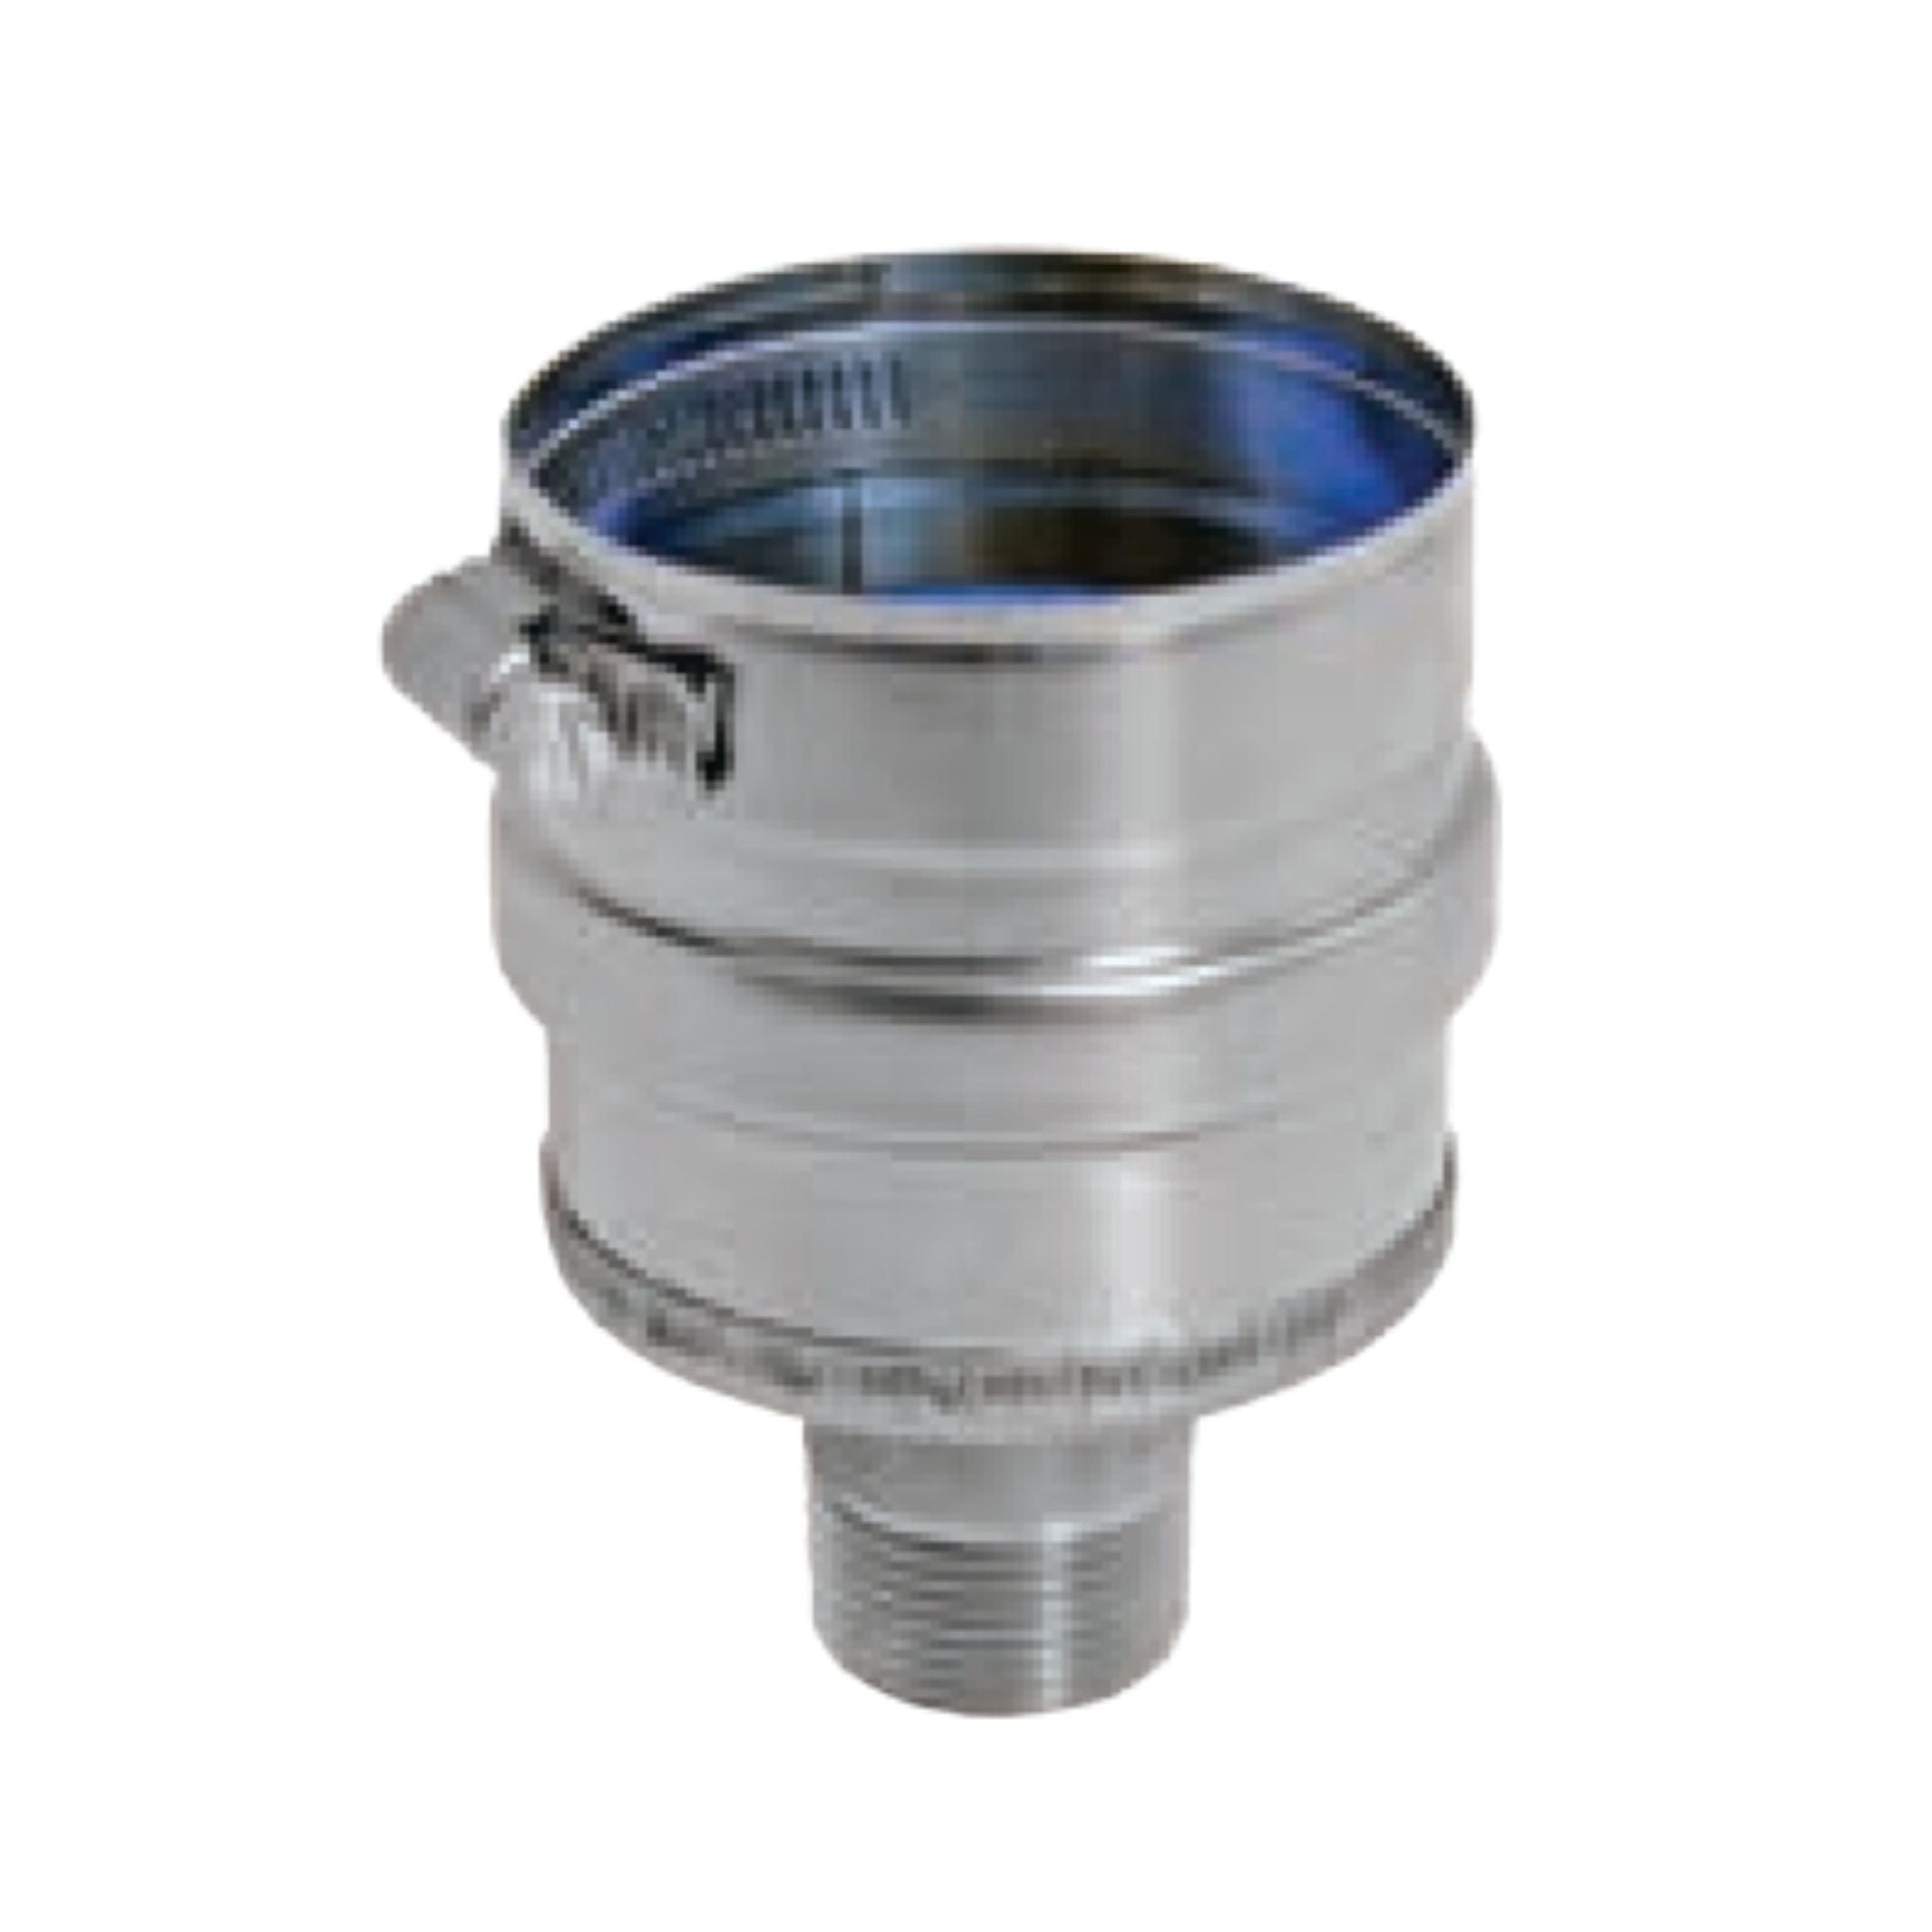 DuraVent FasNSeal 5" 316L Stainless Steel IPS Drain Fitting